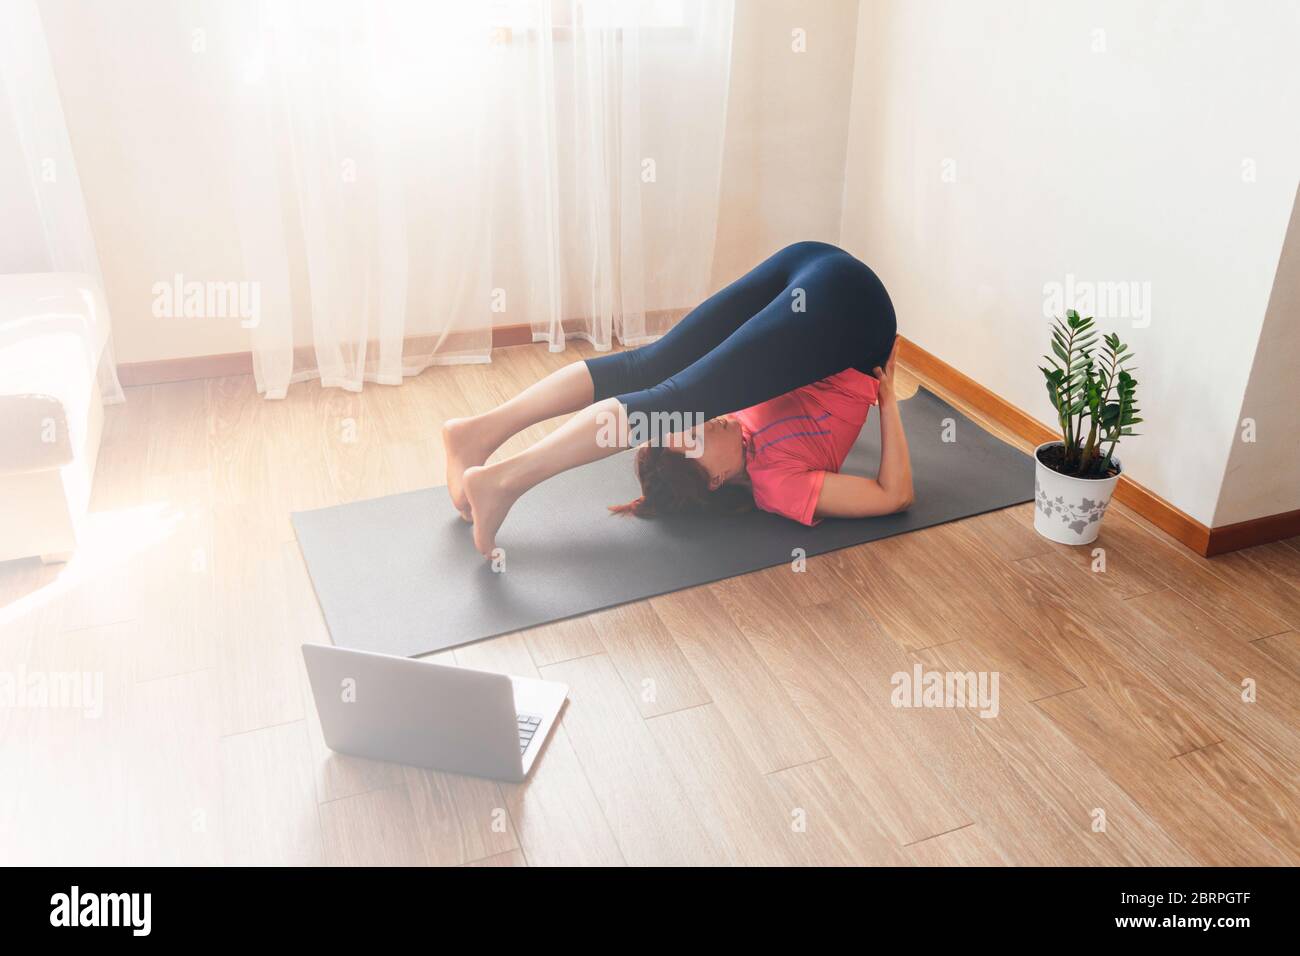 Premium Photo  Young korean lady standing in plank position on yoga mat  exercising at home in living room interior